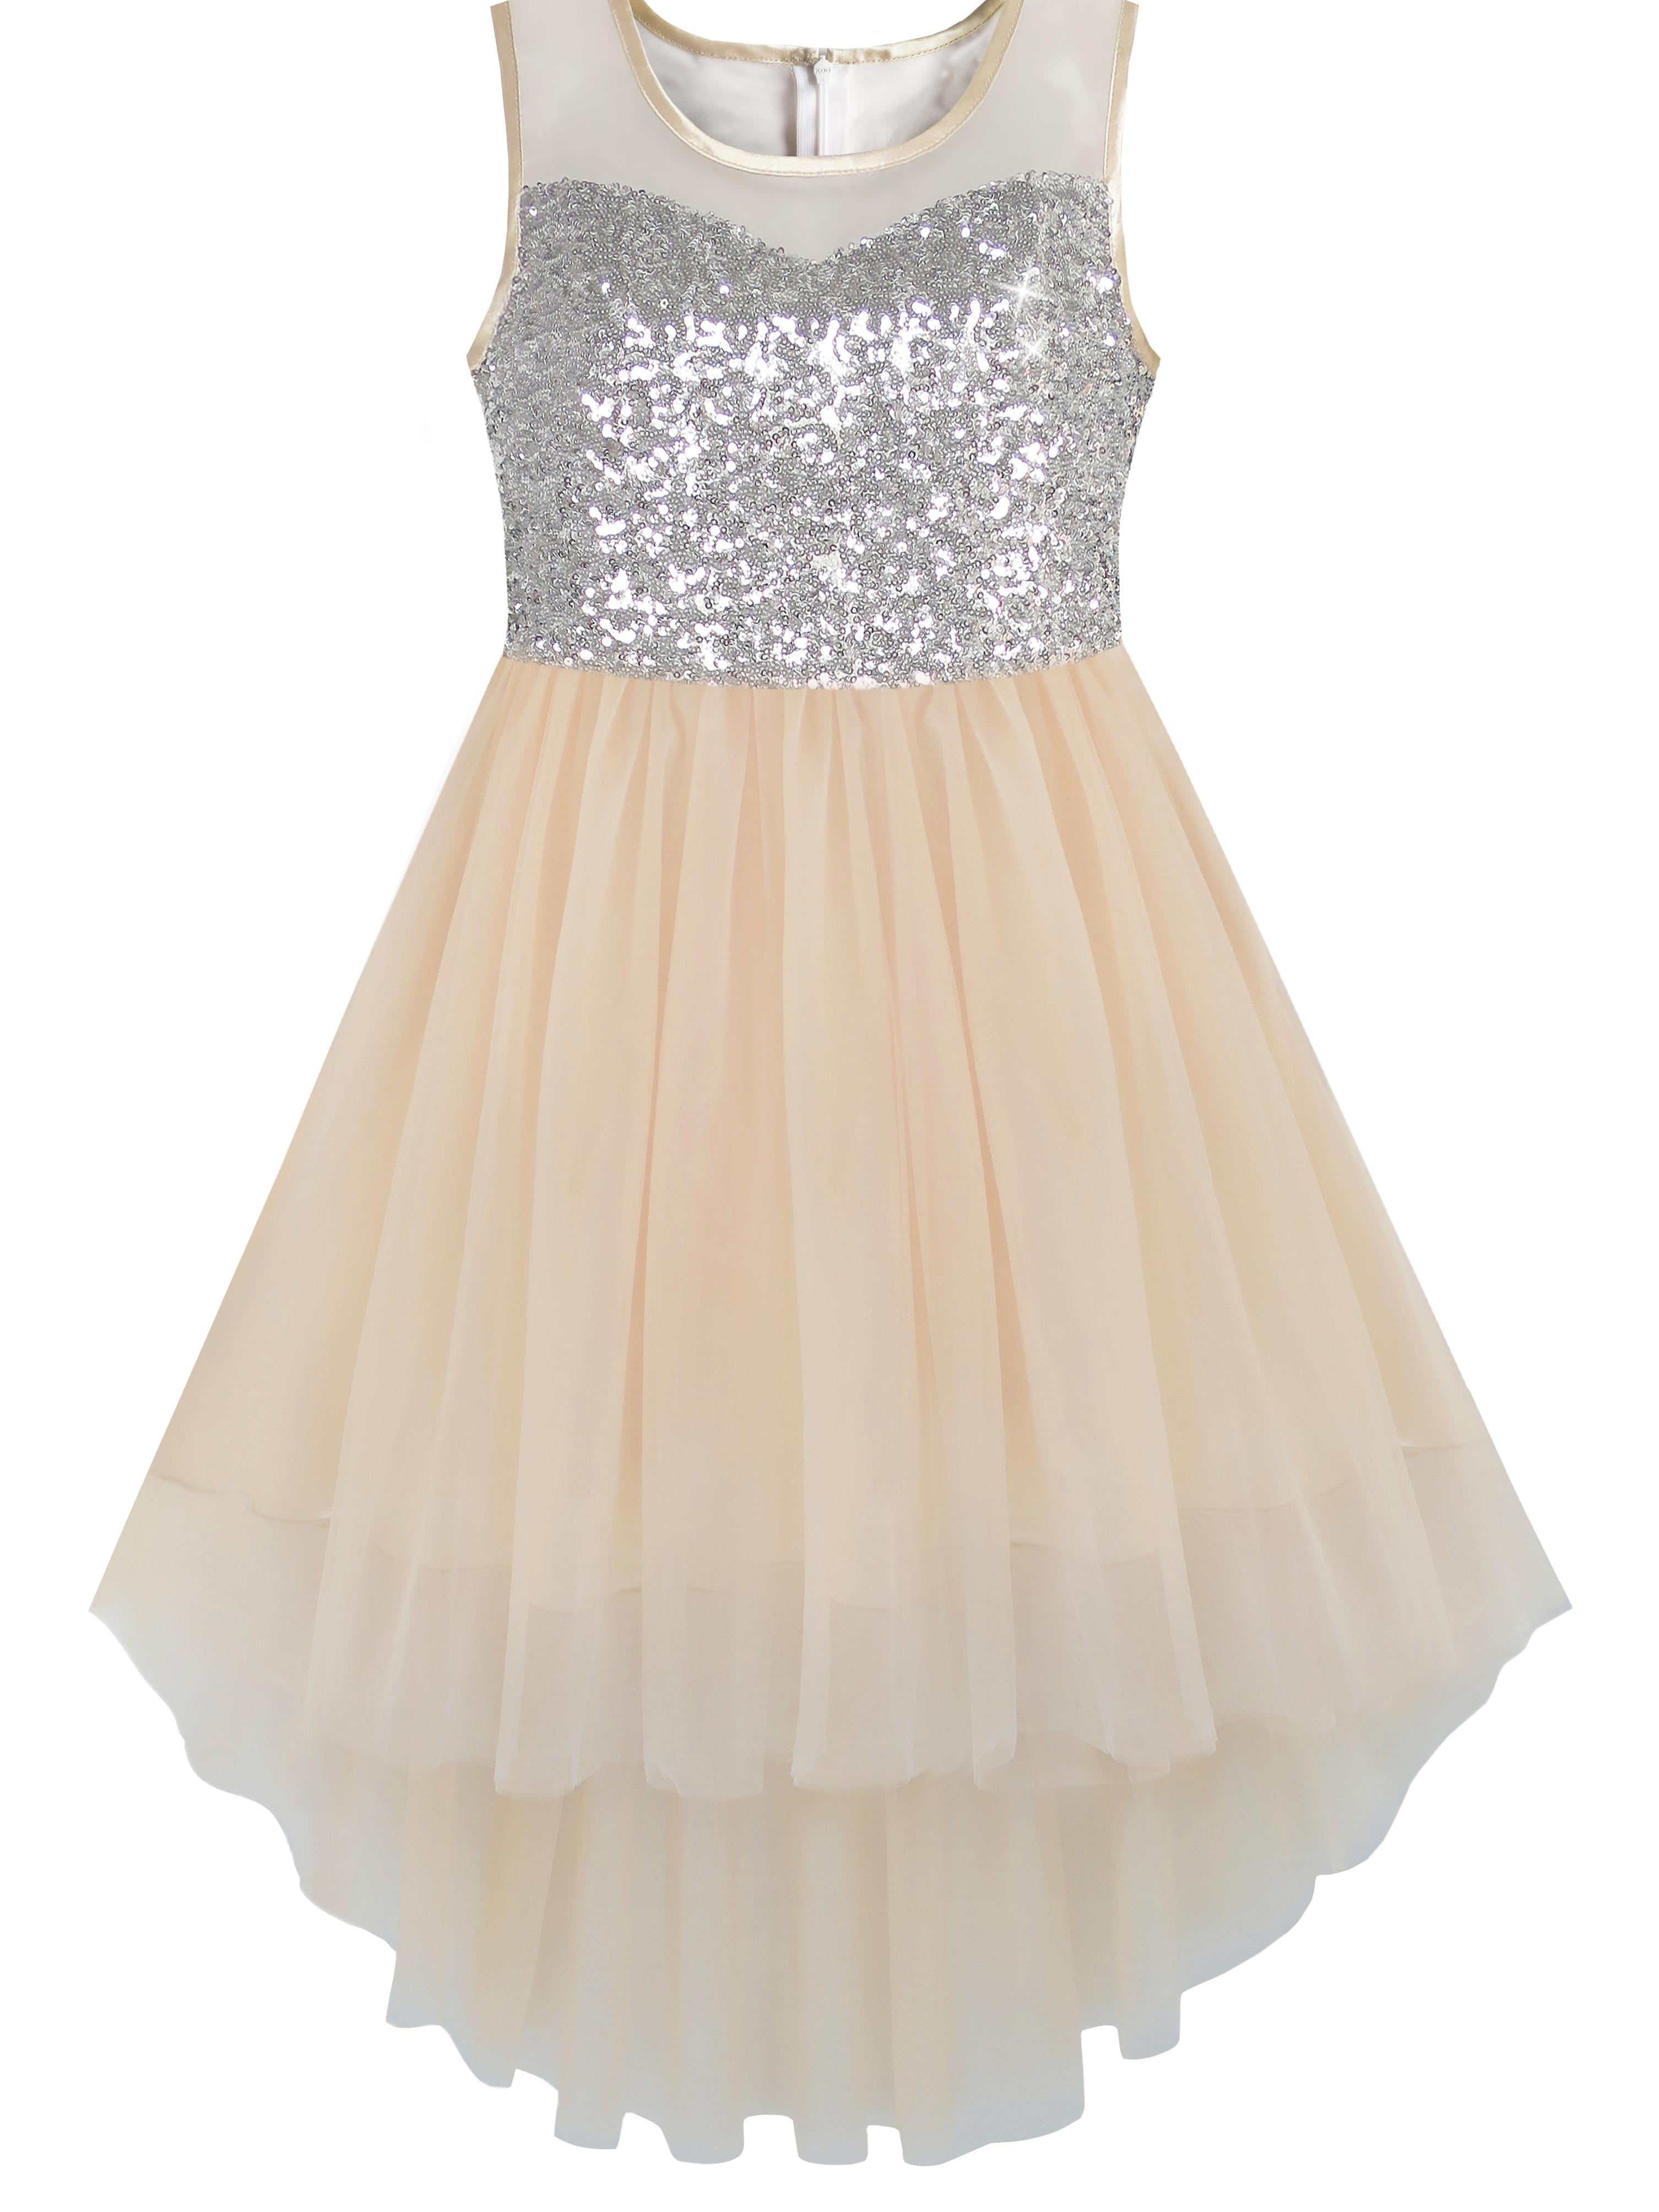 Girls Dress Beige Sequined Tulle Hi-lo Wedding Party Dress 6 Years ...